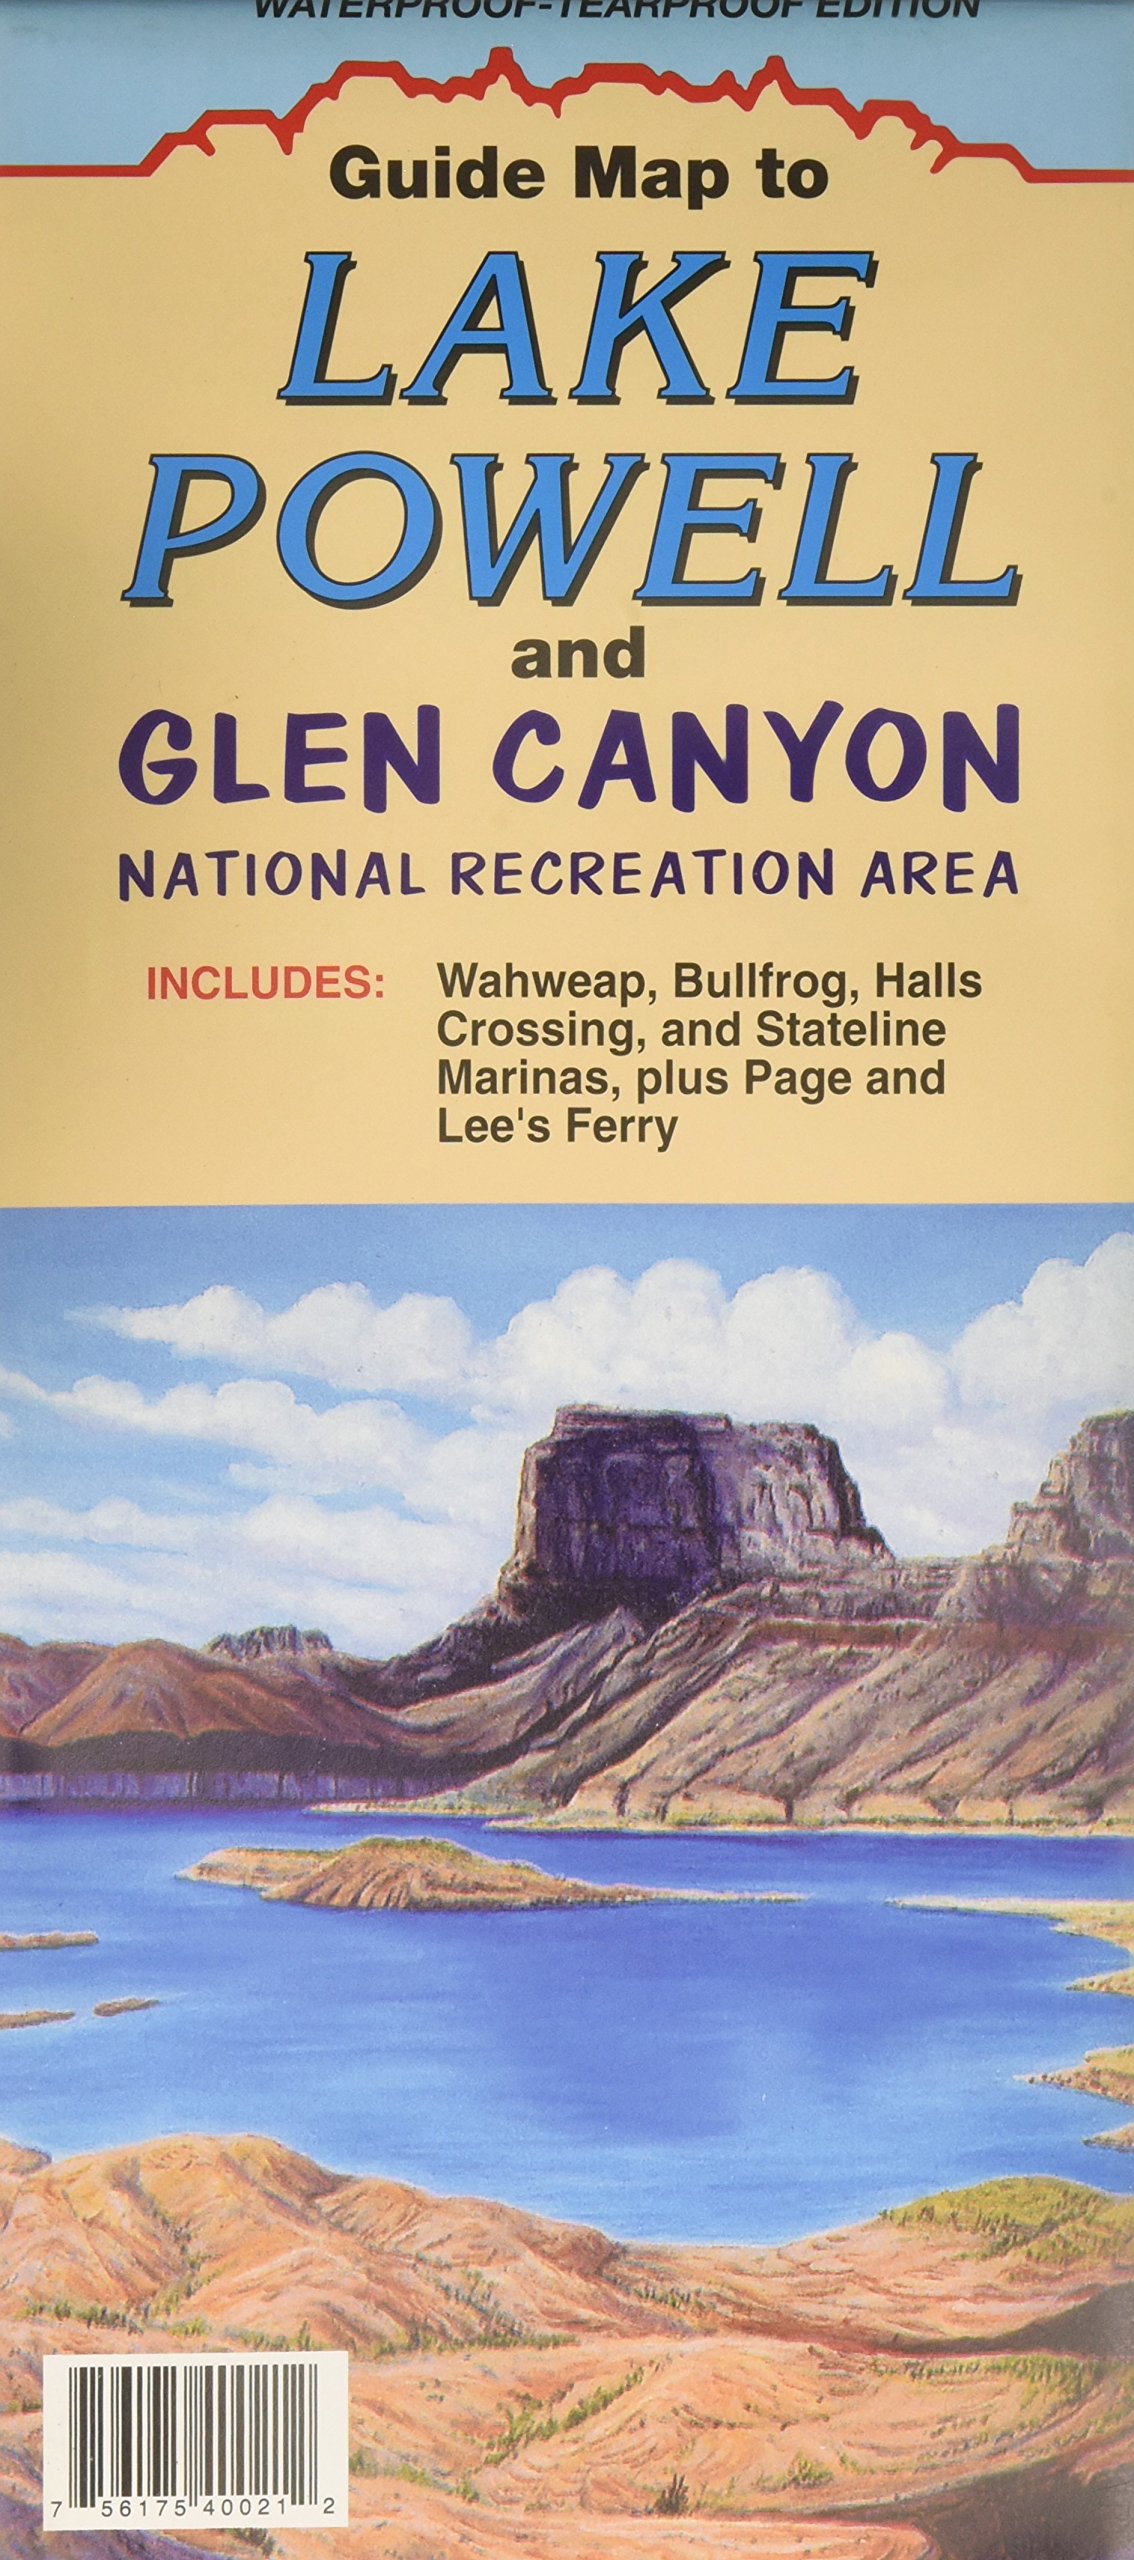 Guide Map to Lake Powell and Glen Canyon : Waterproof-Tearproof edition